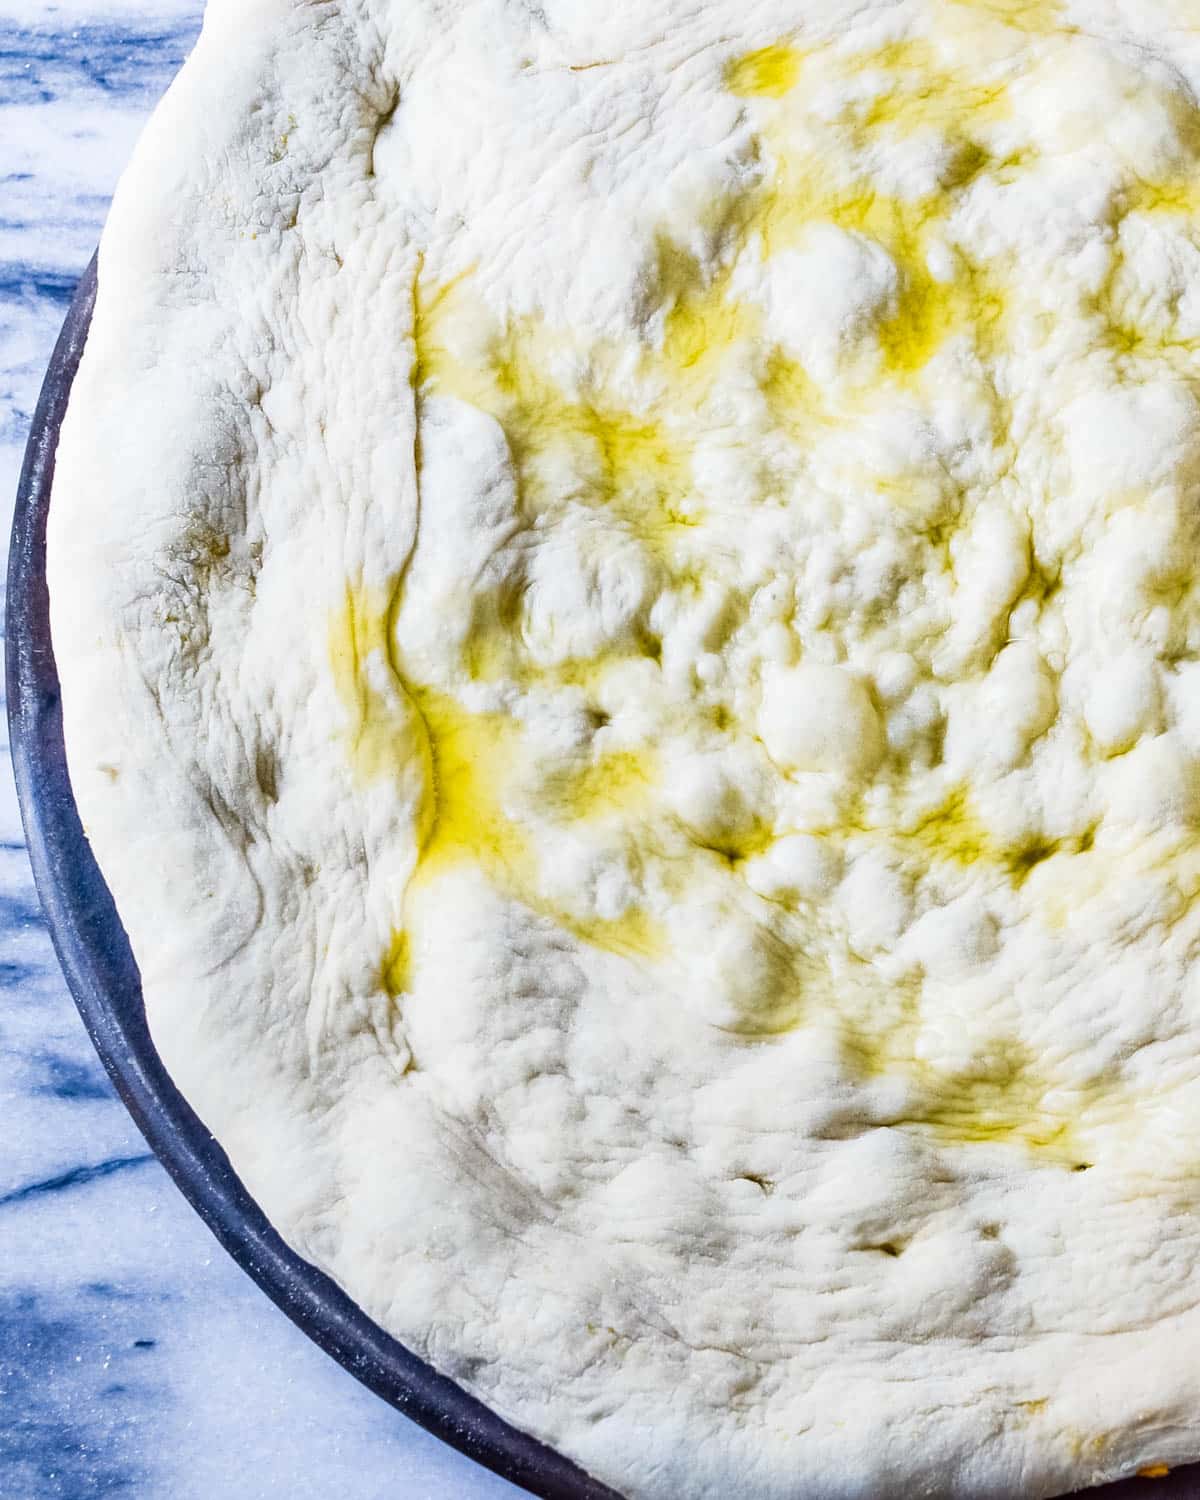 Drizzling the pizza dough with olive oil